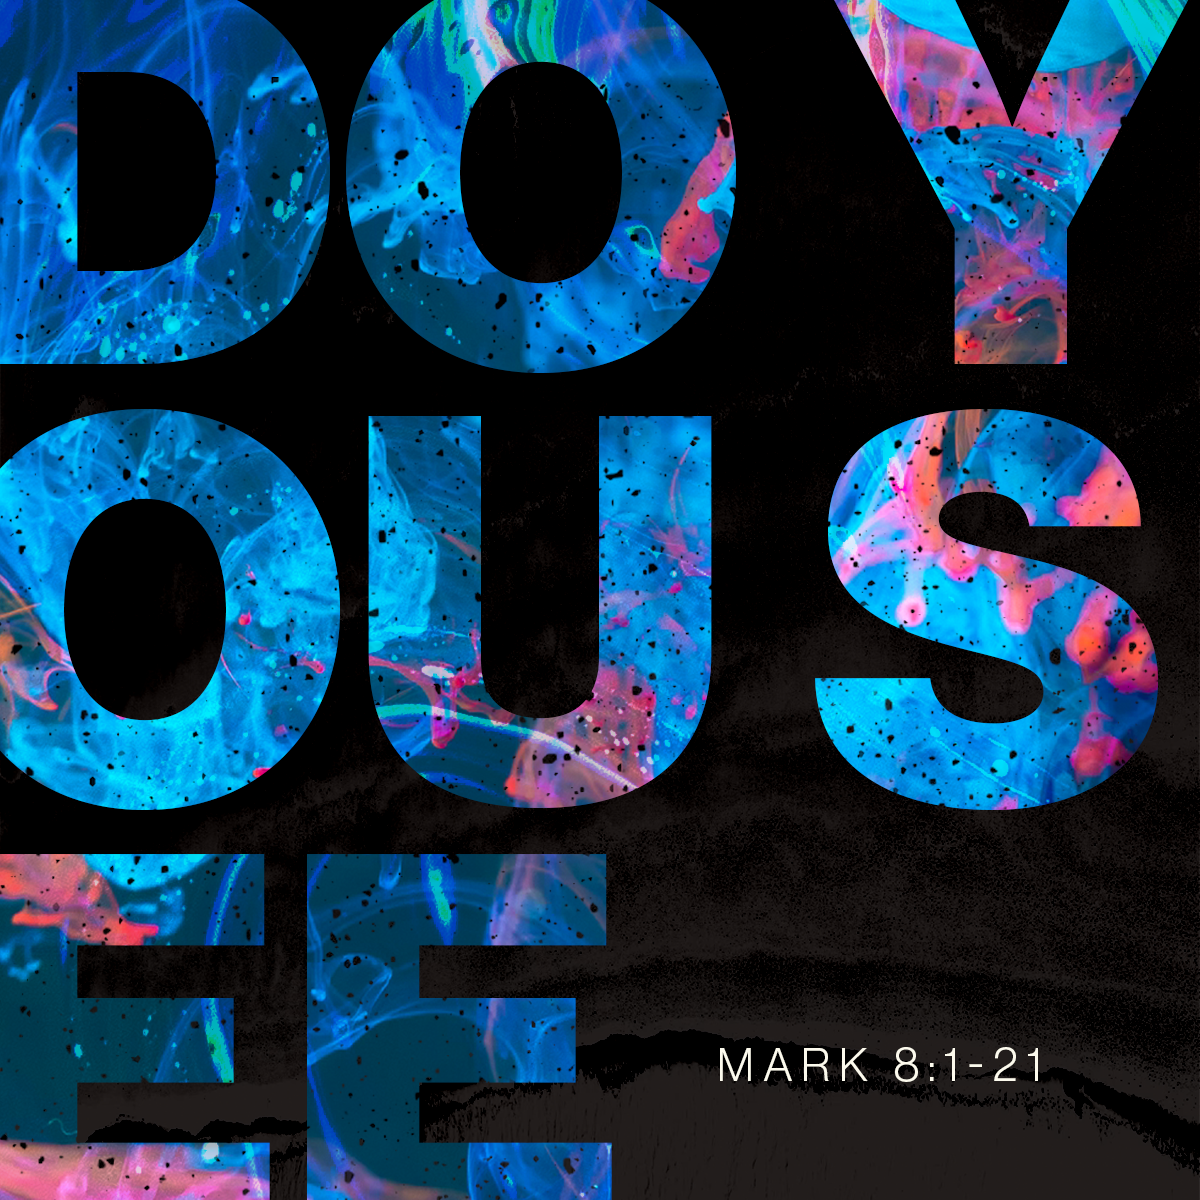 Do You See? (Mark 8:1-21)